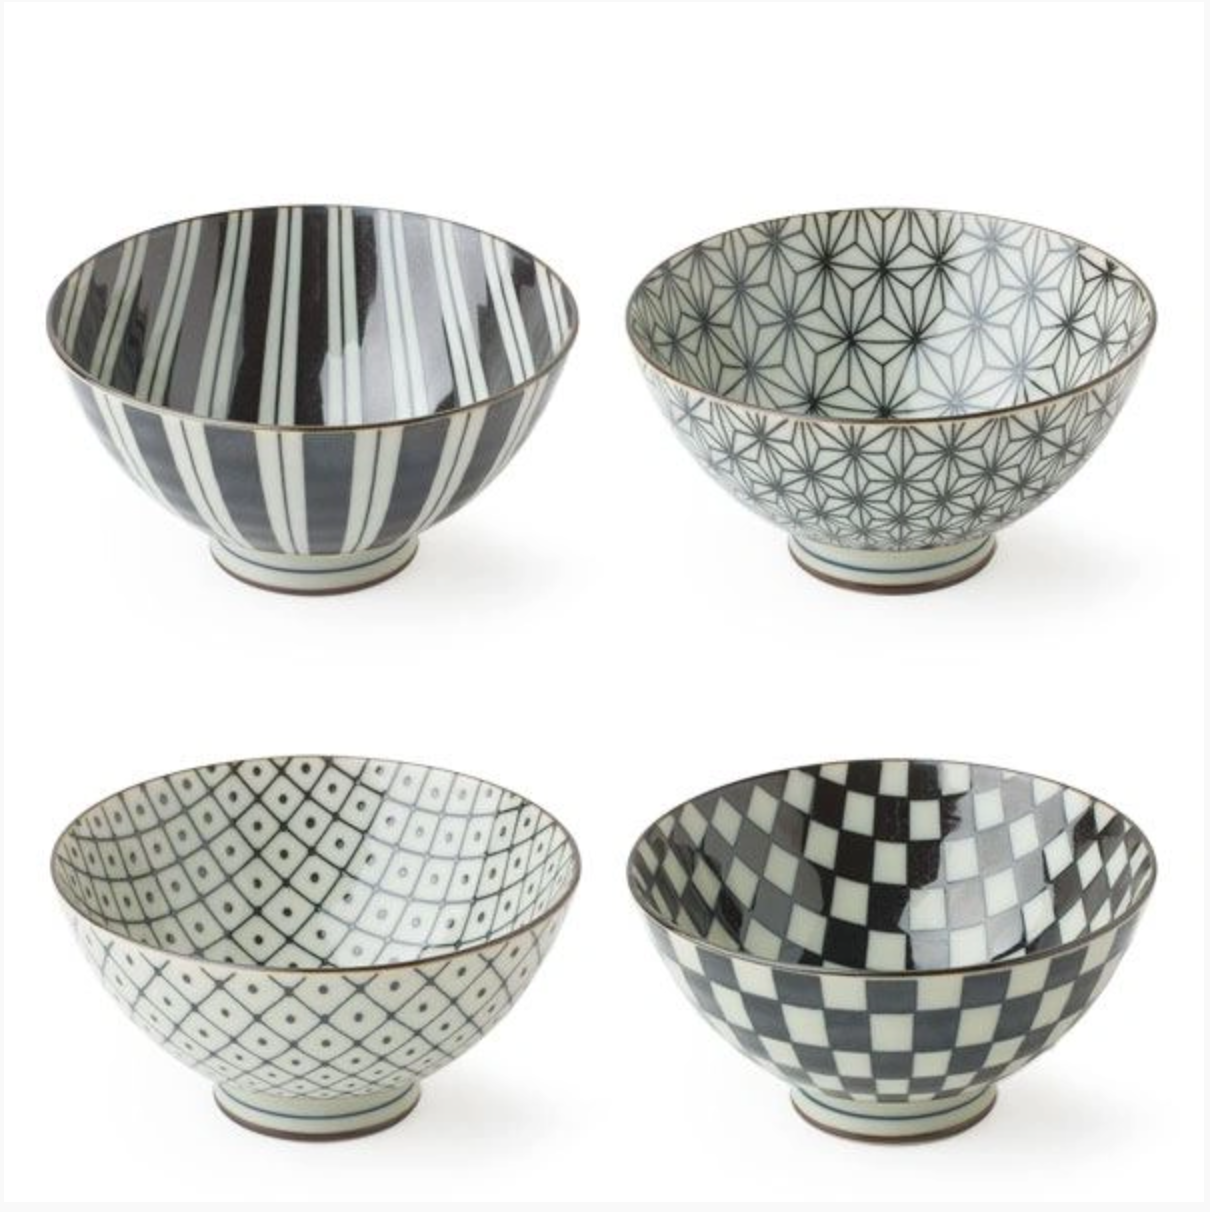 Vintage Inspired Small Bowls, Set of 4